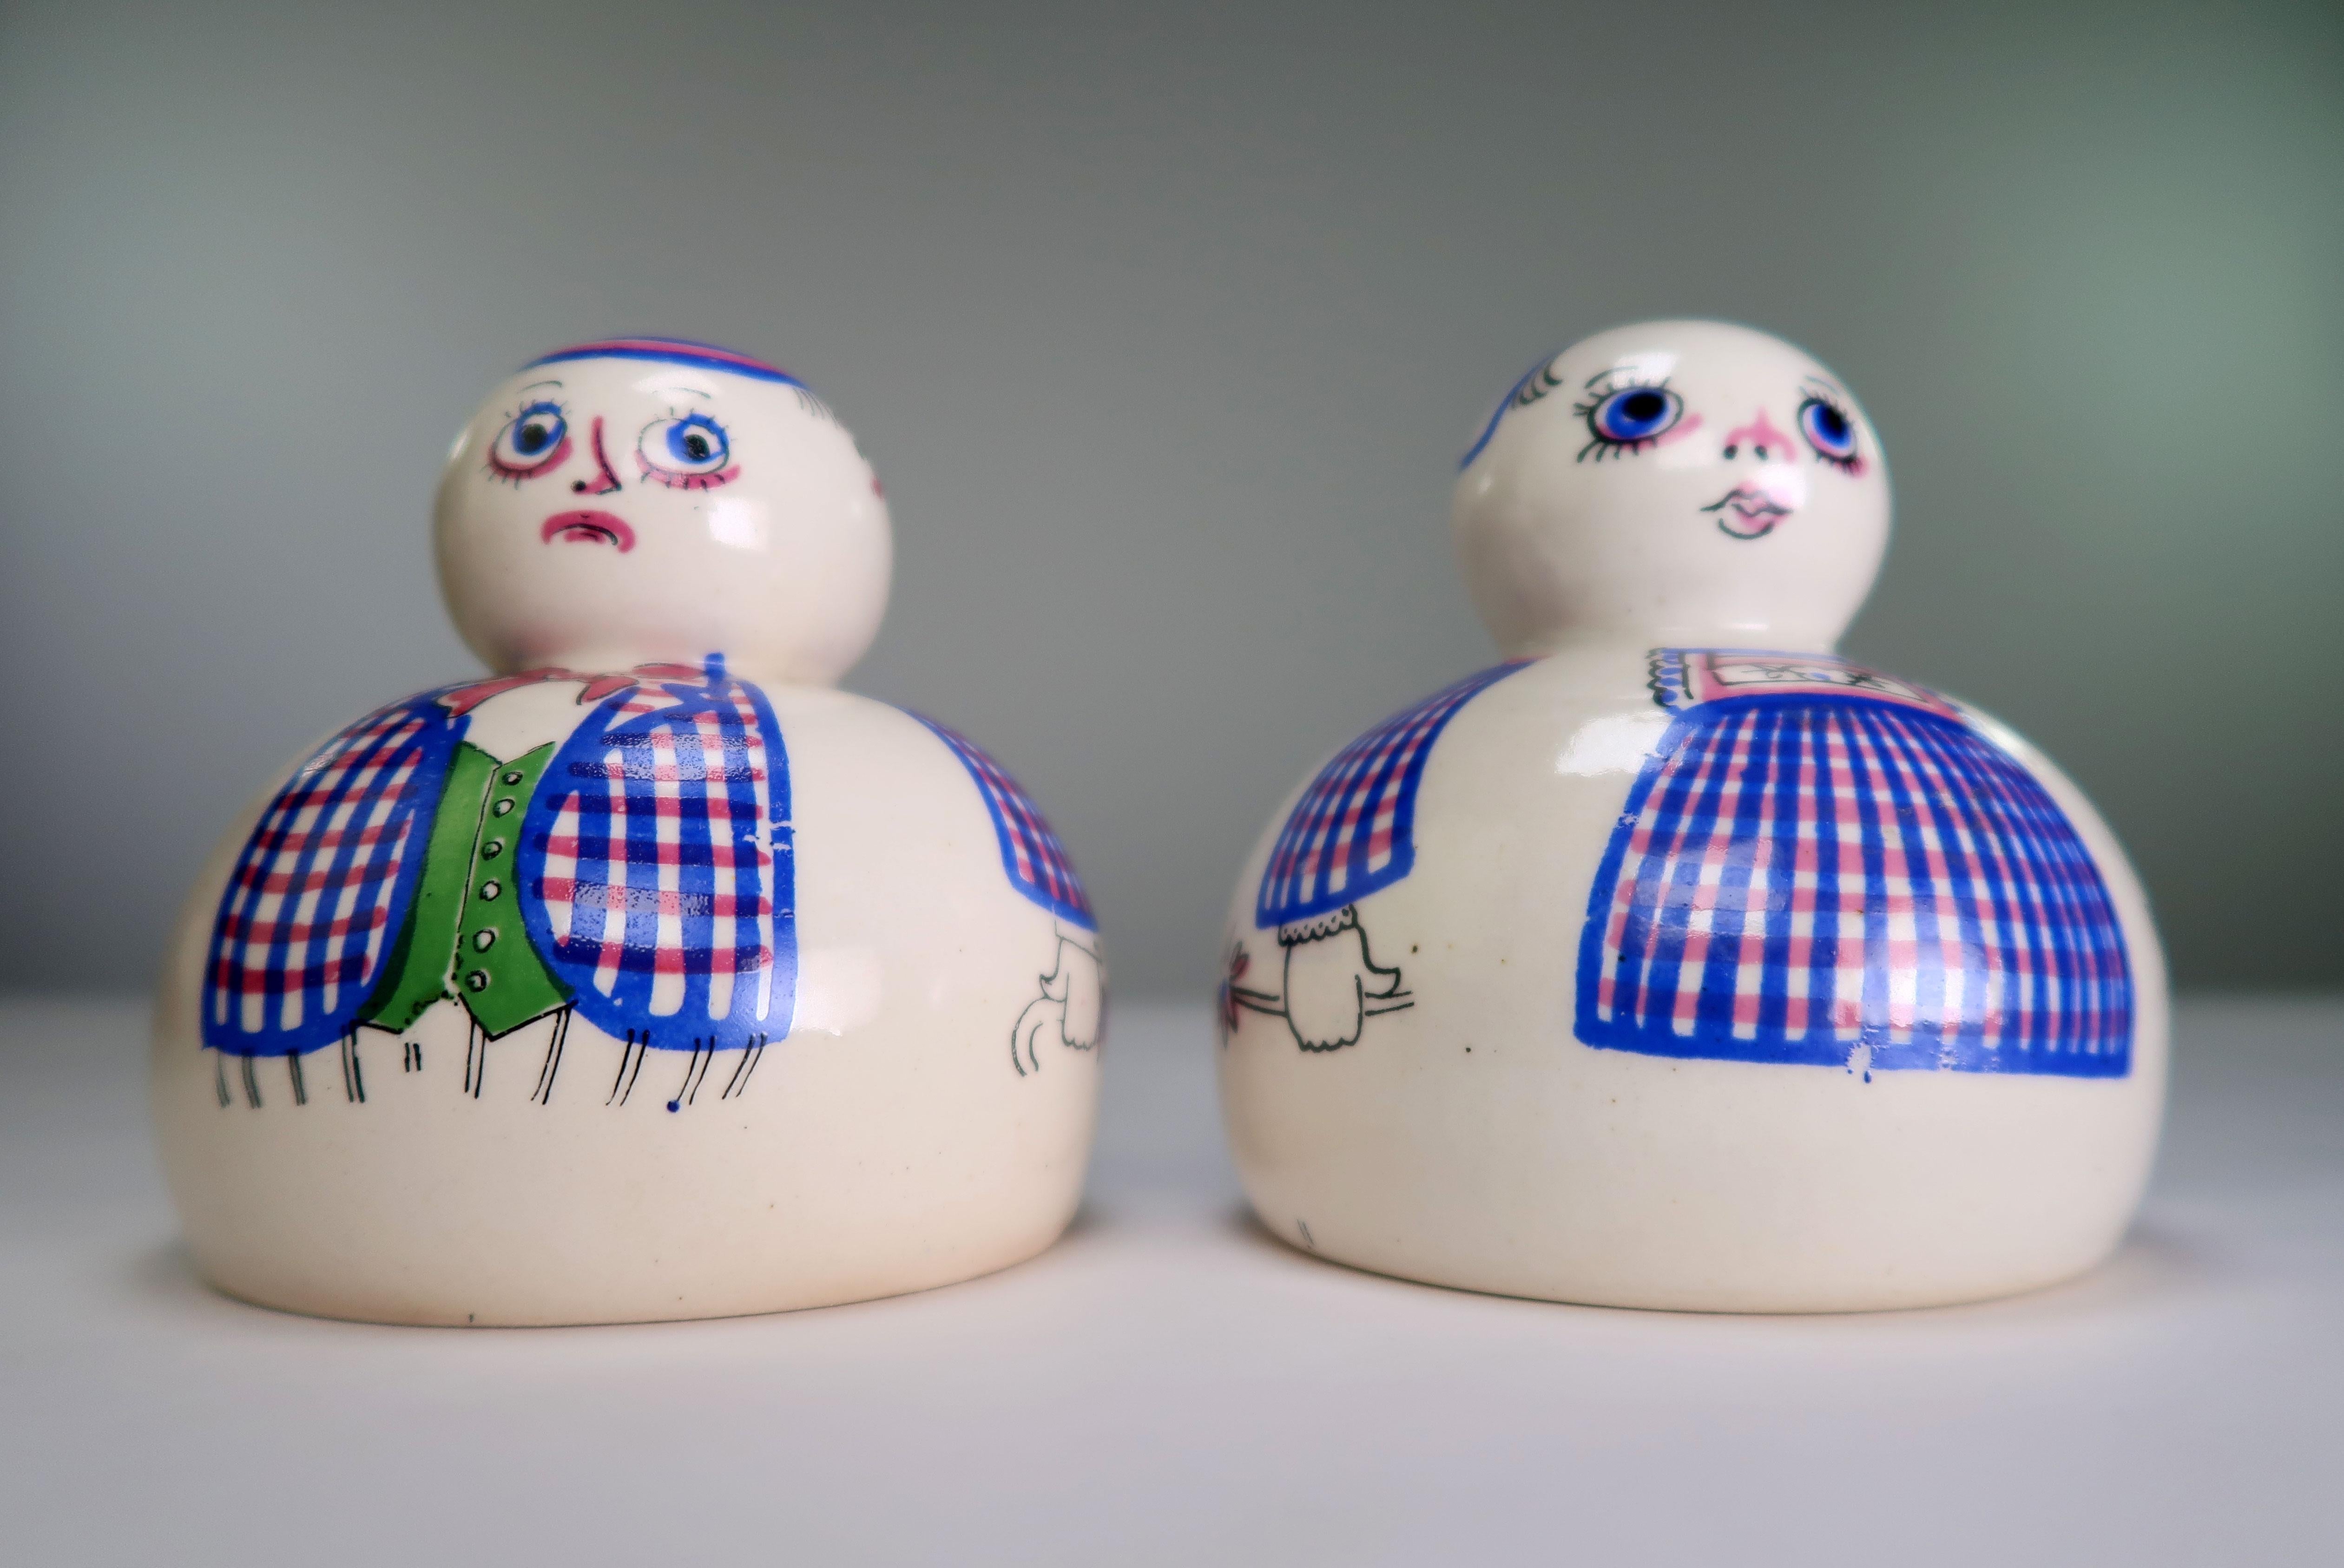 Set of two decorative Danish Mid-Century Modern handmade and hand-painted stoneware pepper shakers by Aksini. Designed and manufactured in the mid 1950s by Danish ceramic artist and painter Aksel Sigvald Nielsen (1919-1989), hence the production